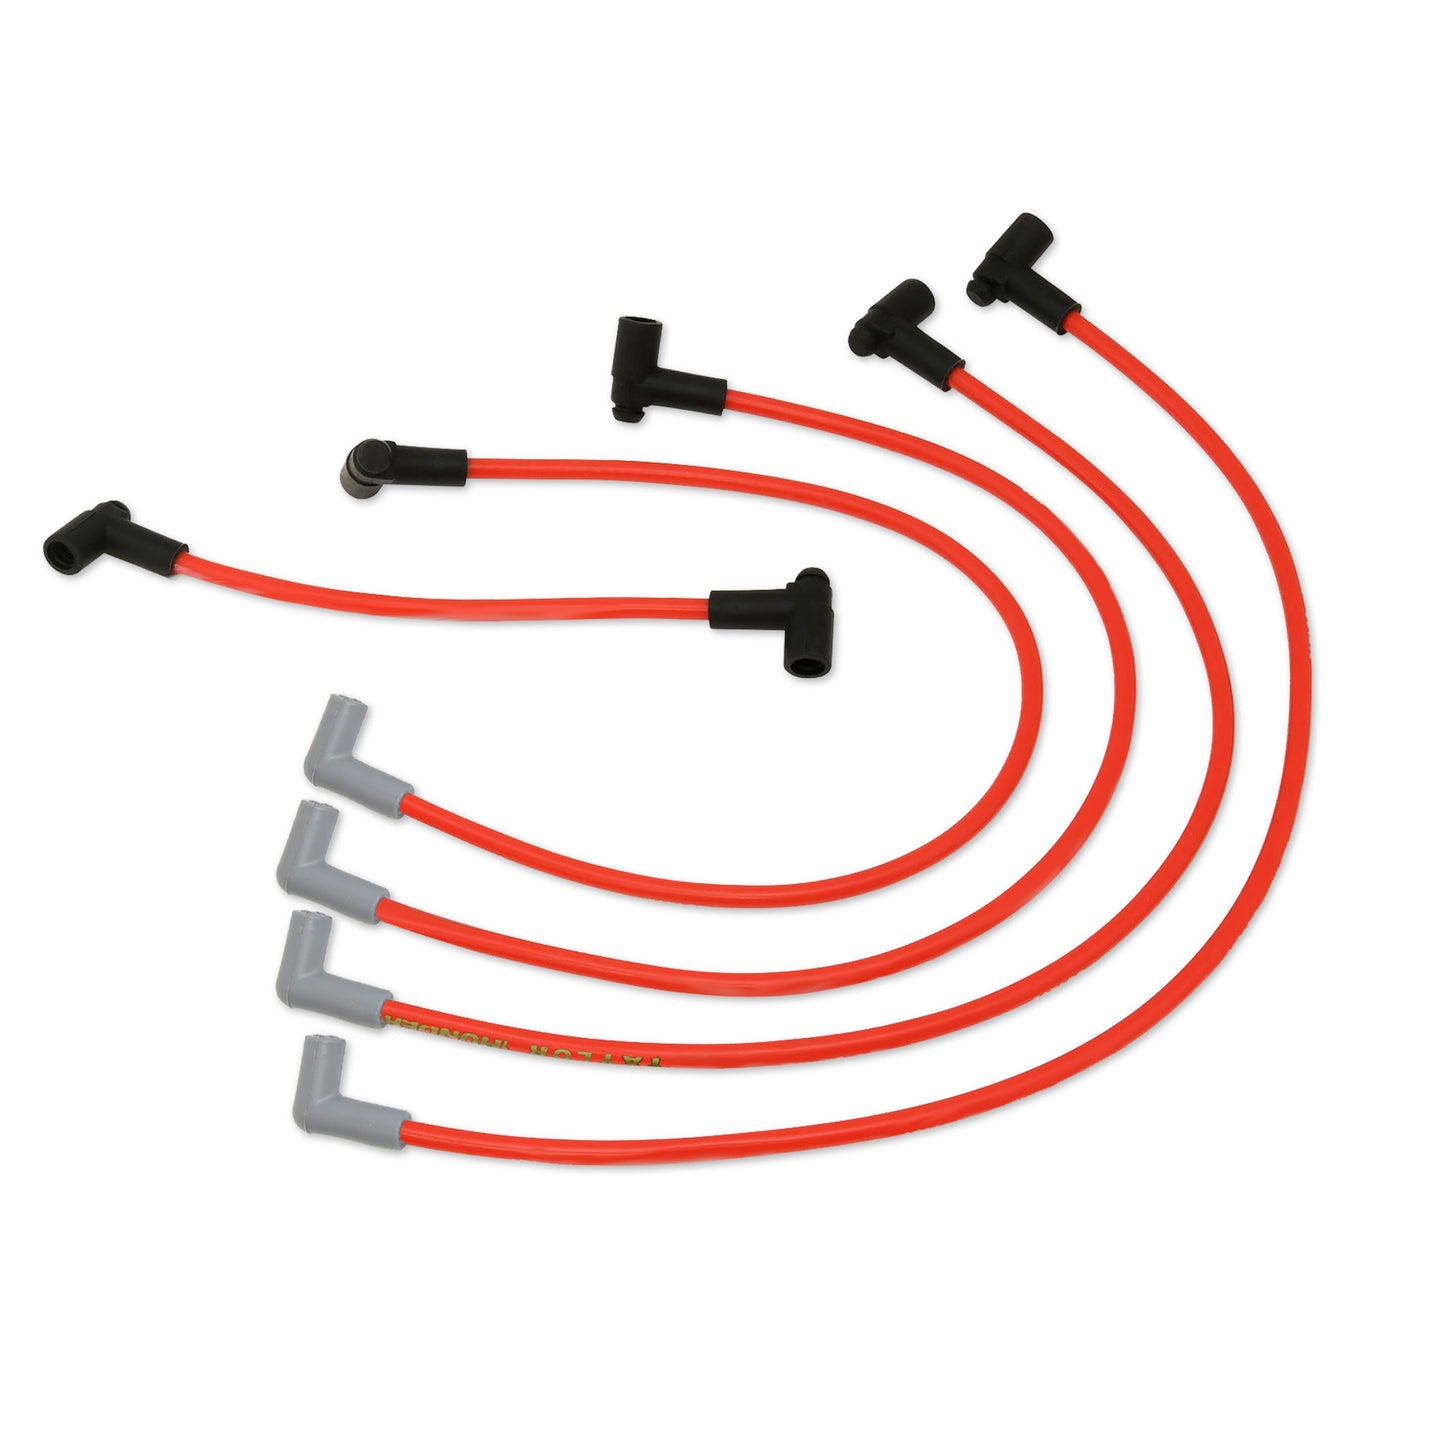 Taylor Cable 84287 8.2mm Thundervolt Custom Spark Plug Wires 4 cyl red